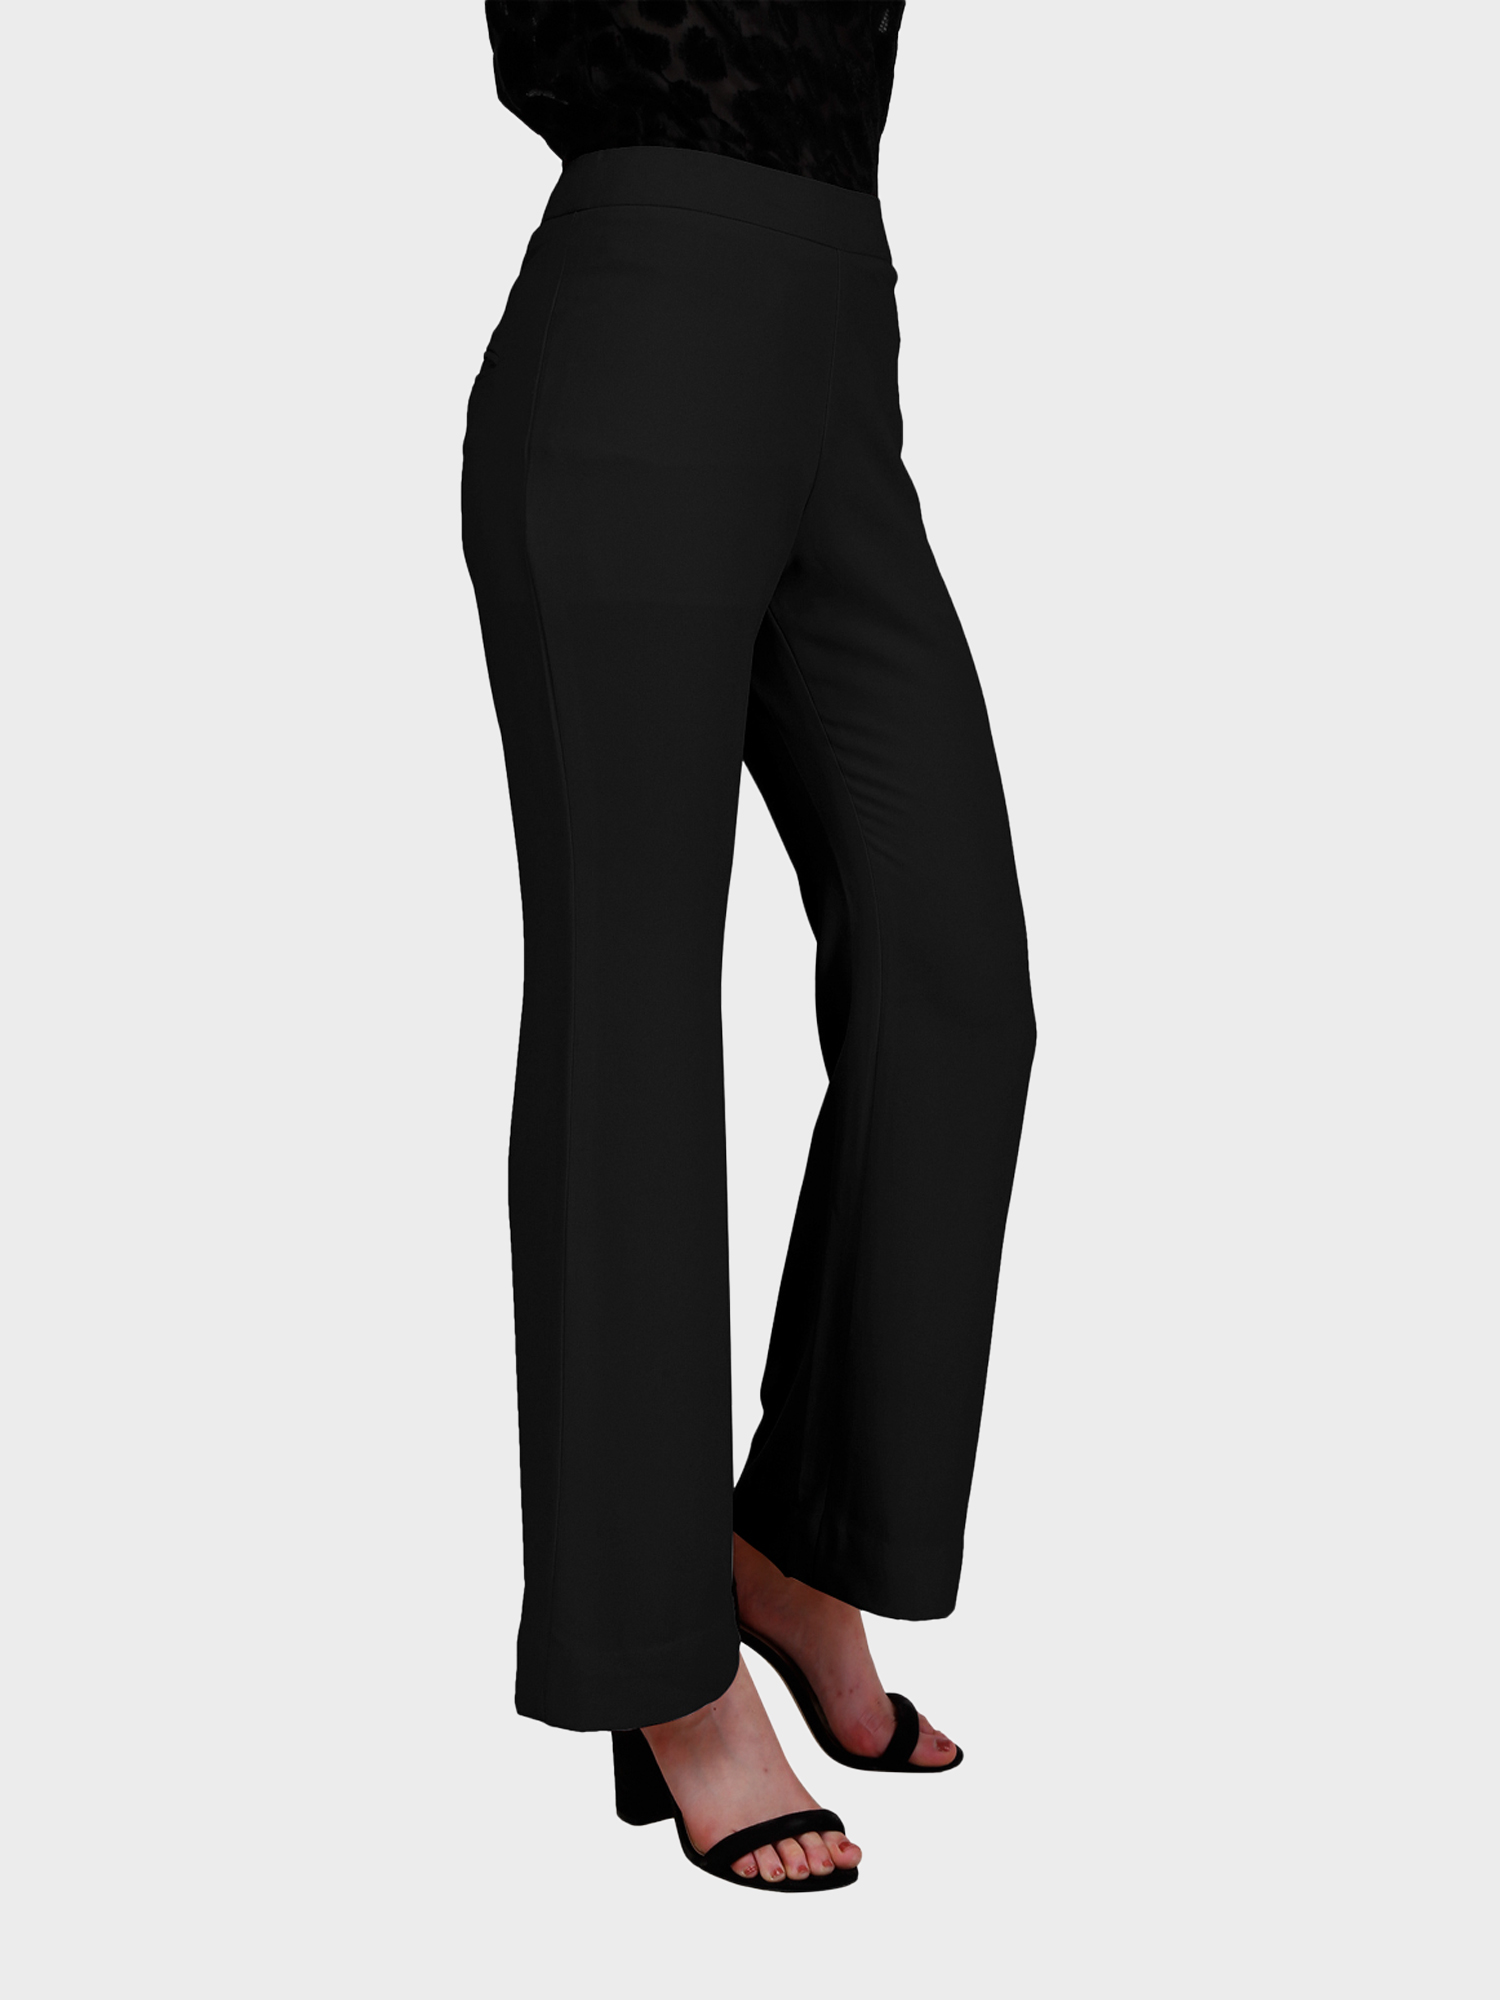 Black Flared Trousers - Front